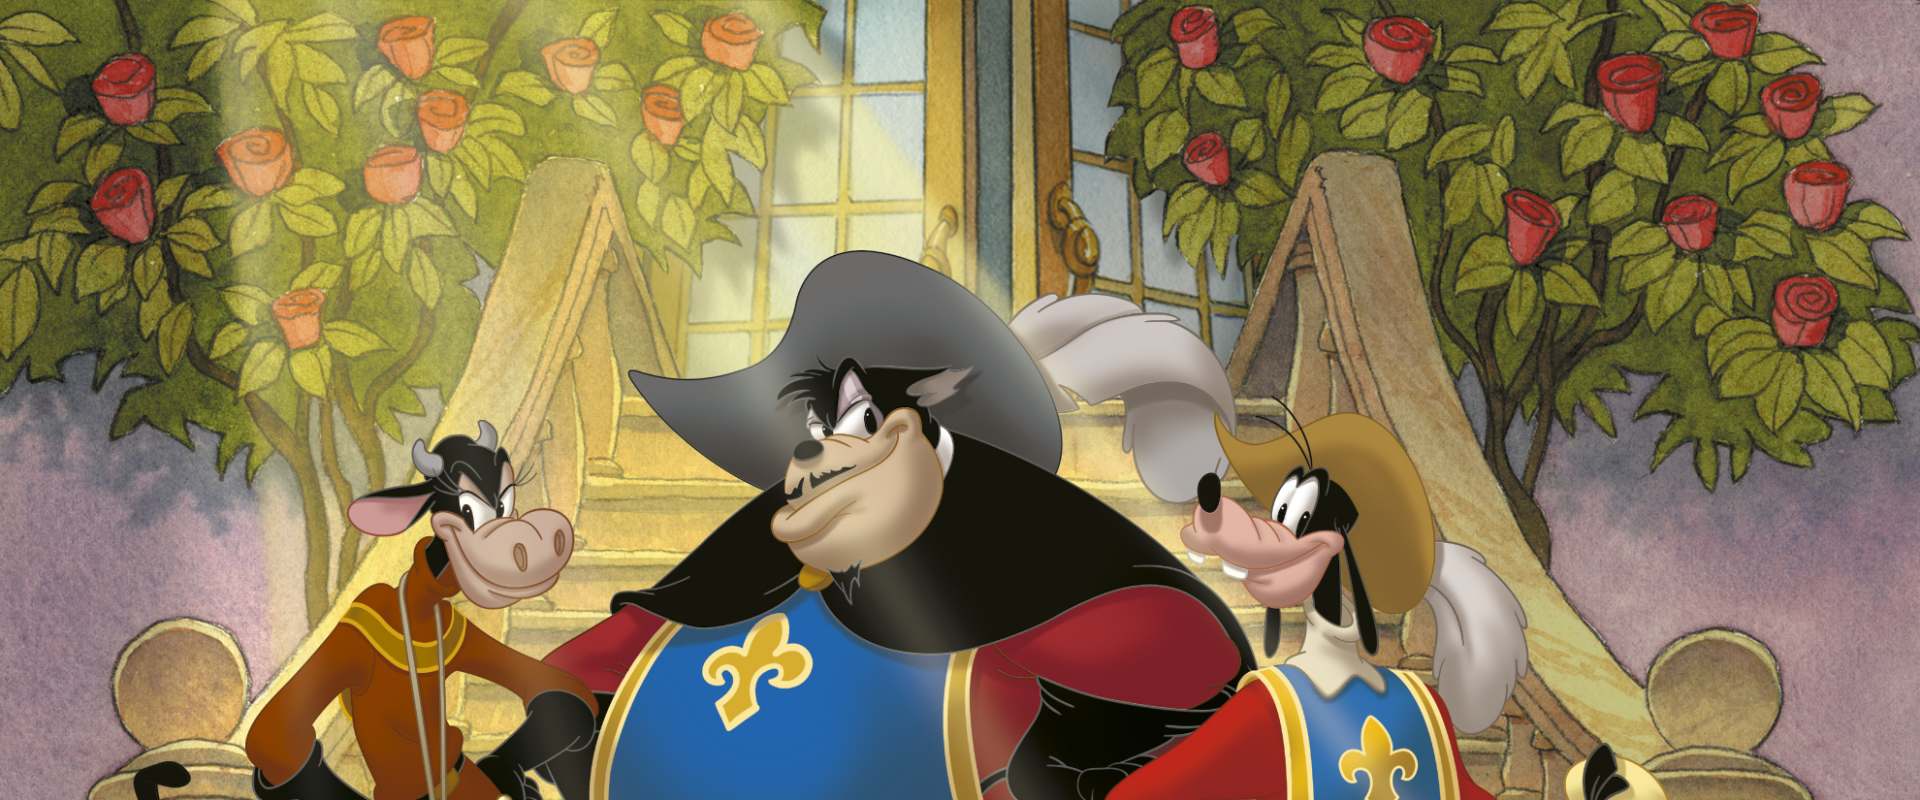 Mickey, Donald, Goofy: The Three Musketeers background 2